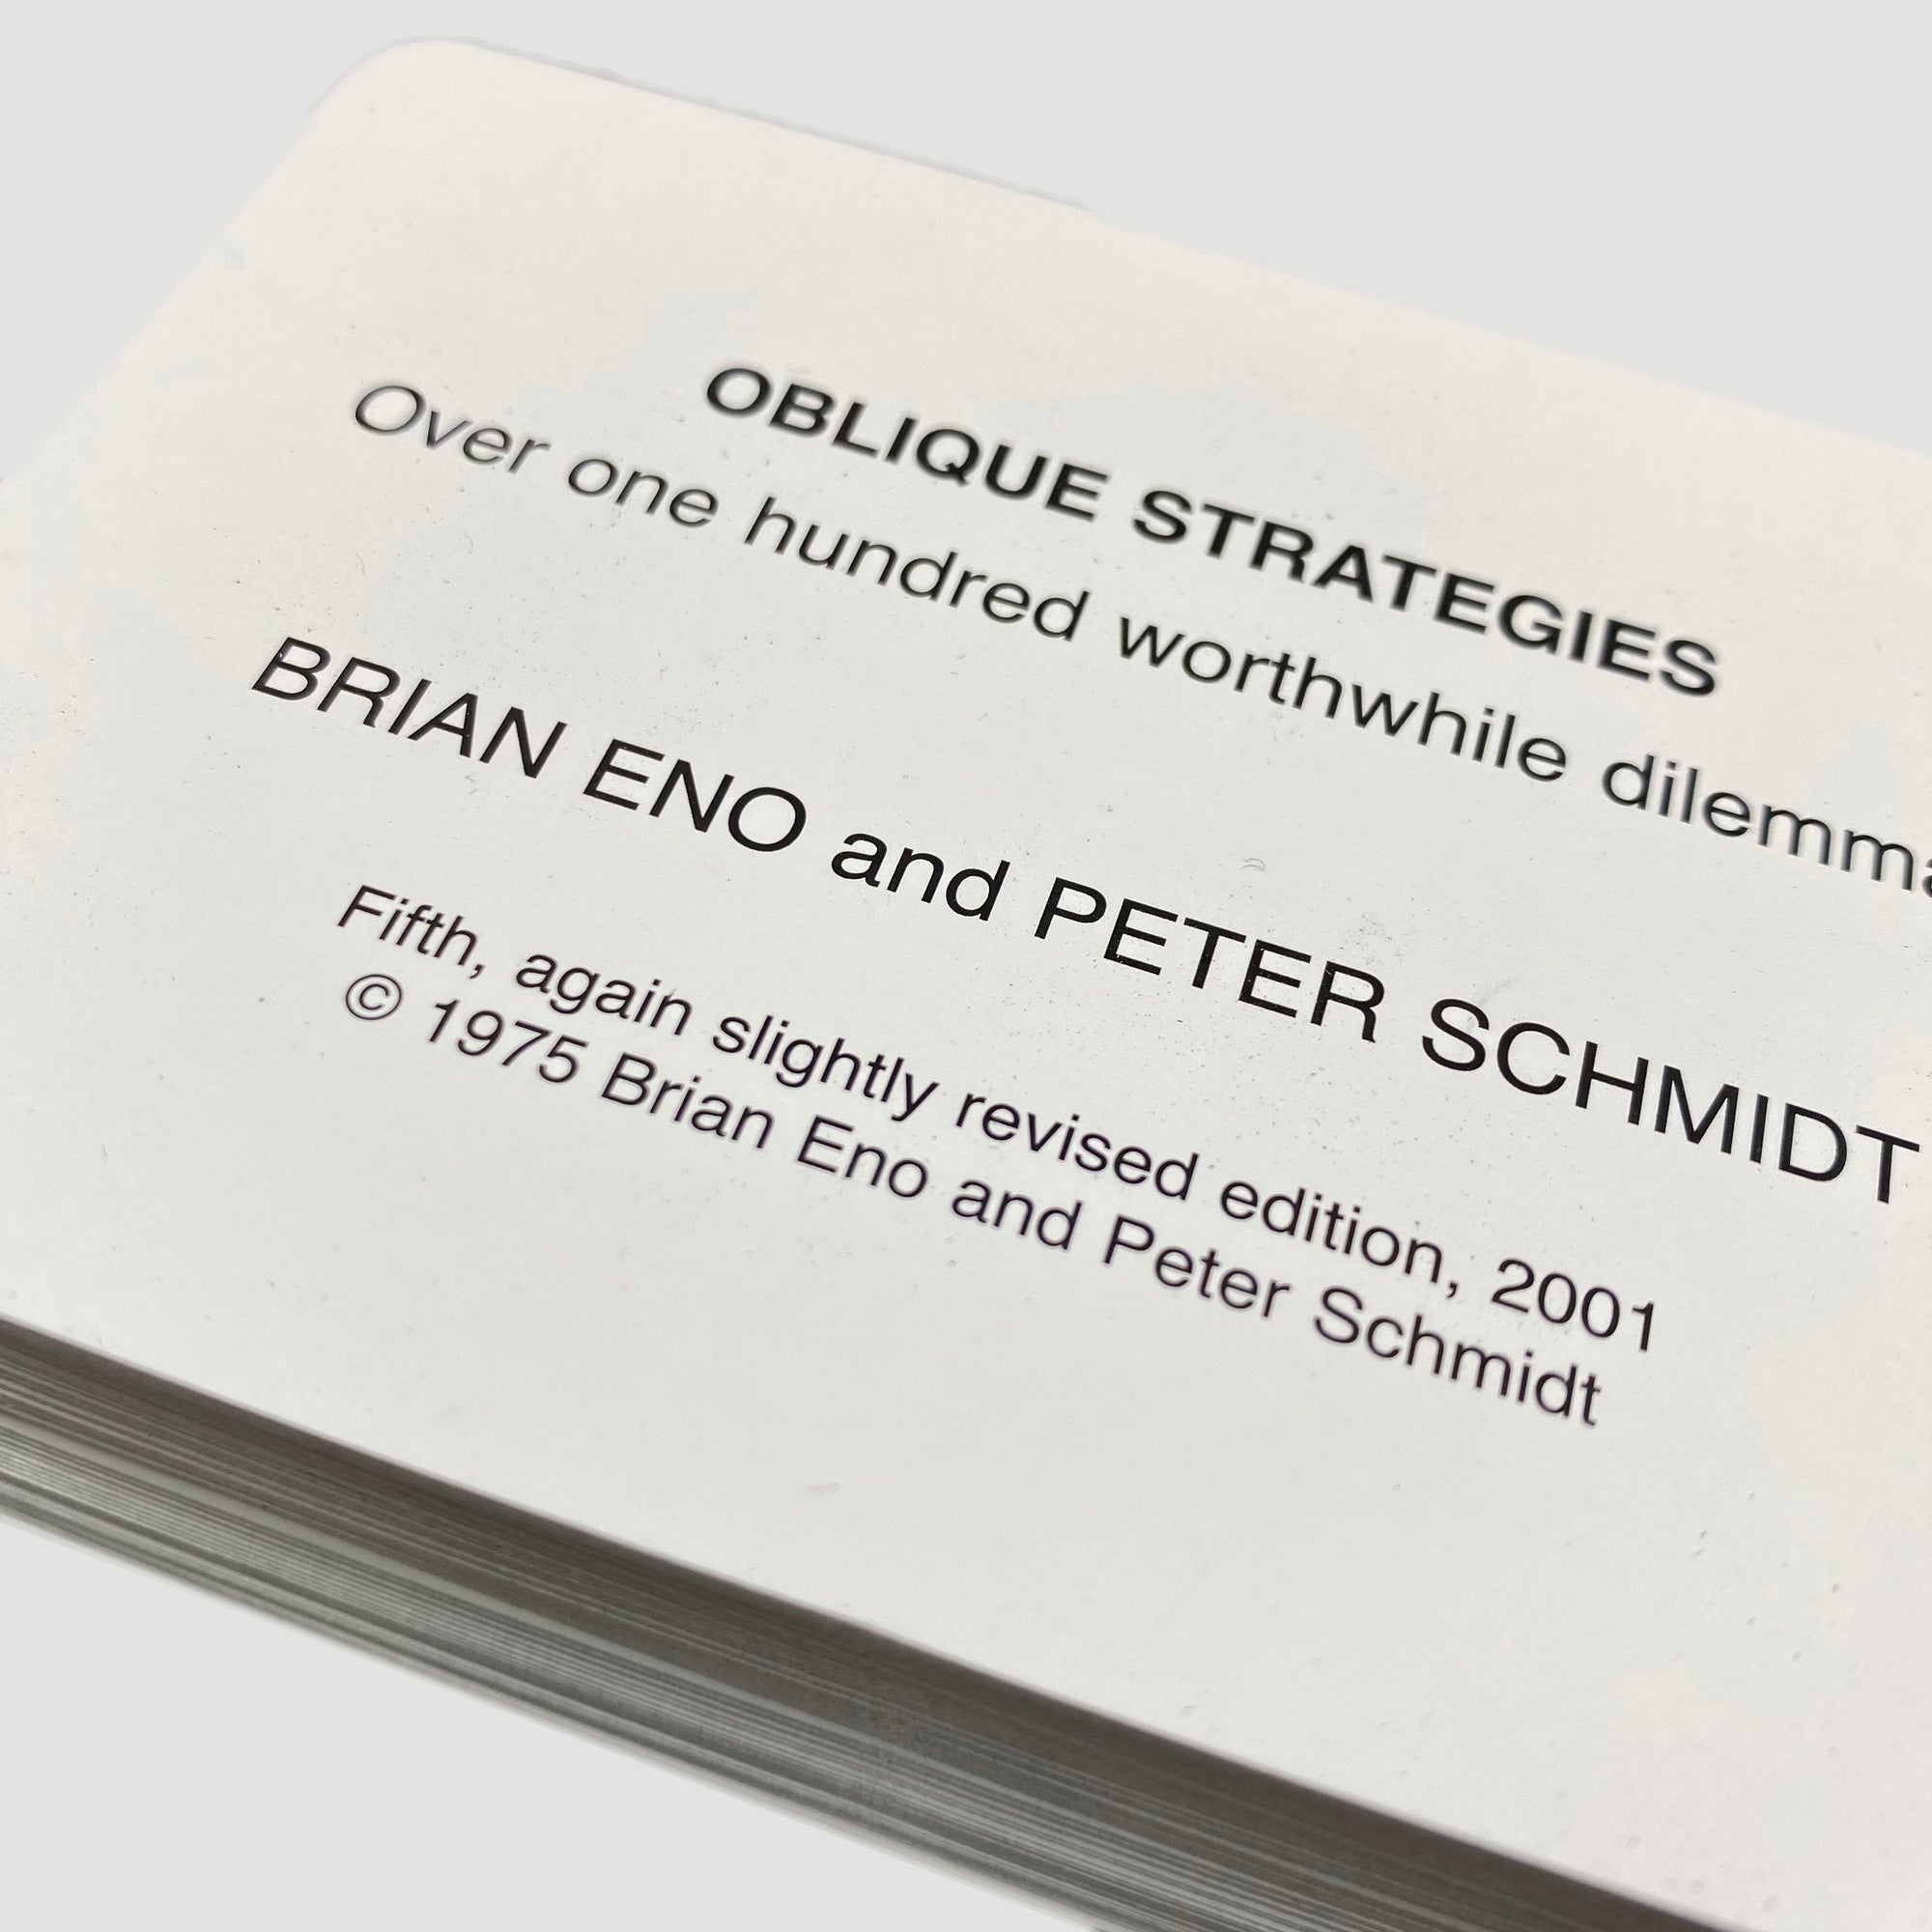 OBLIQUE STRATEGIES by Brian Eno and Peter Schmidt Fifth edition 